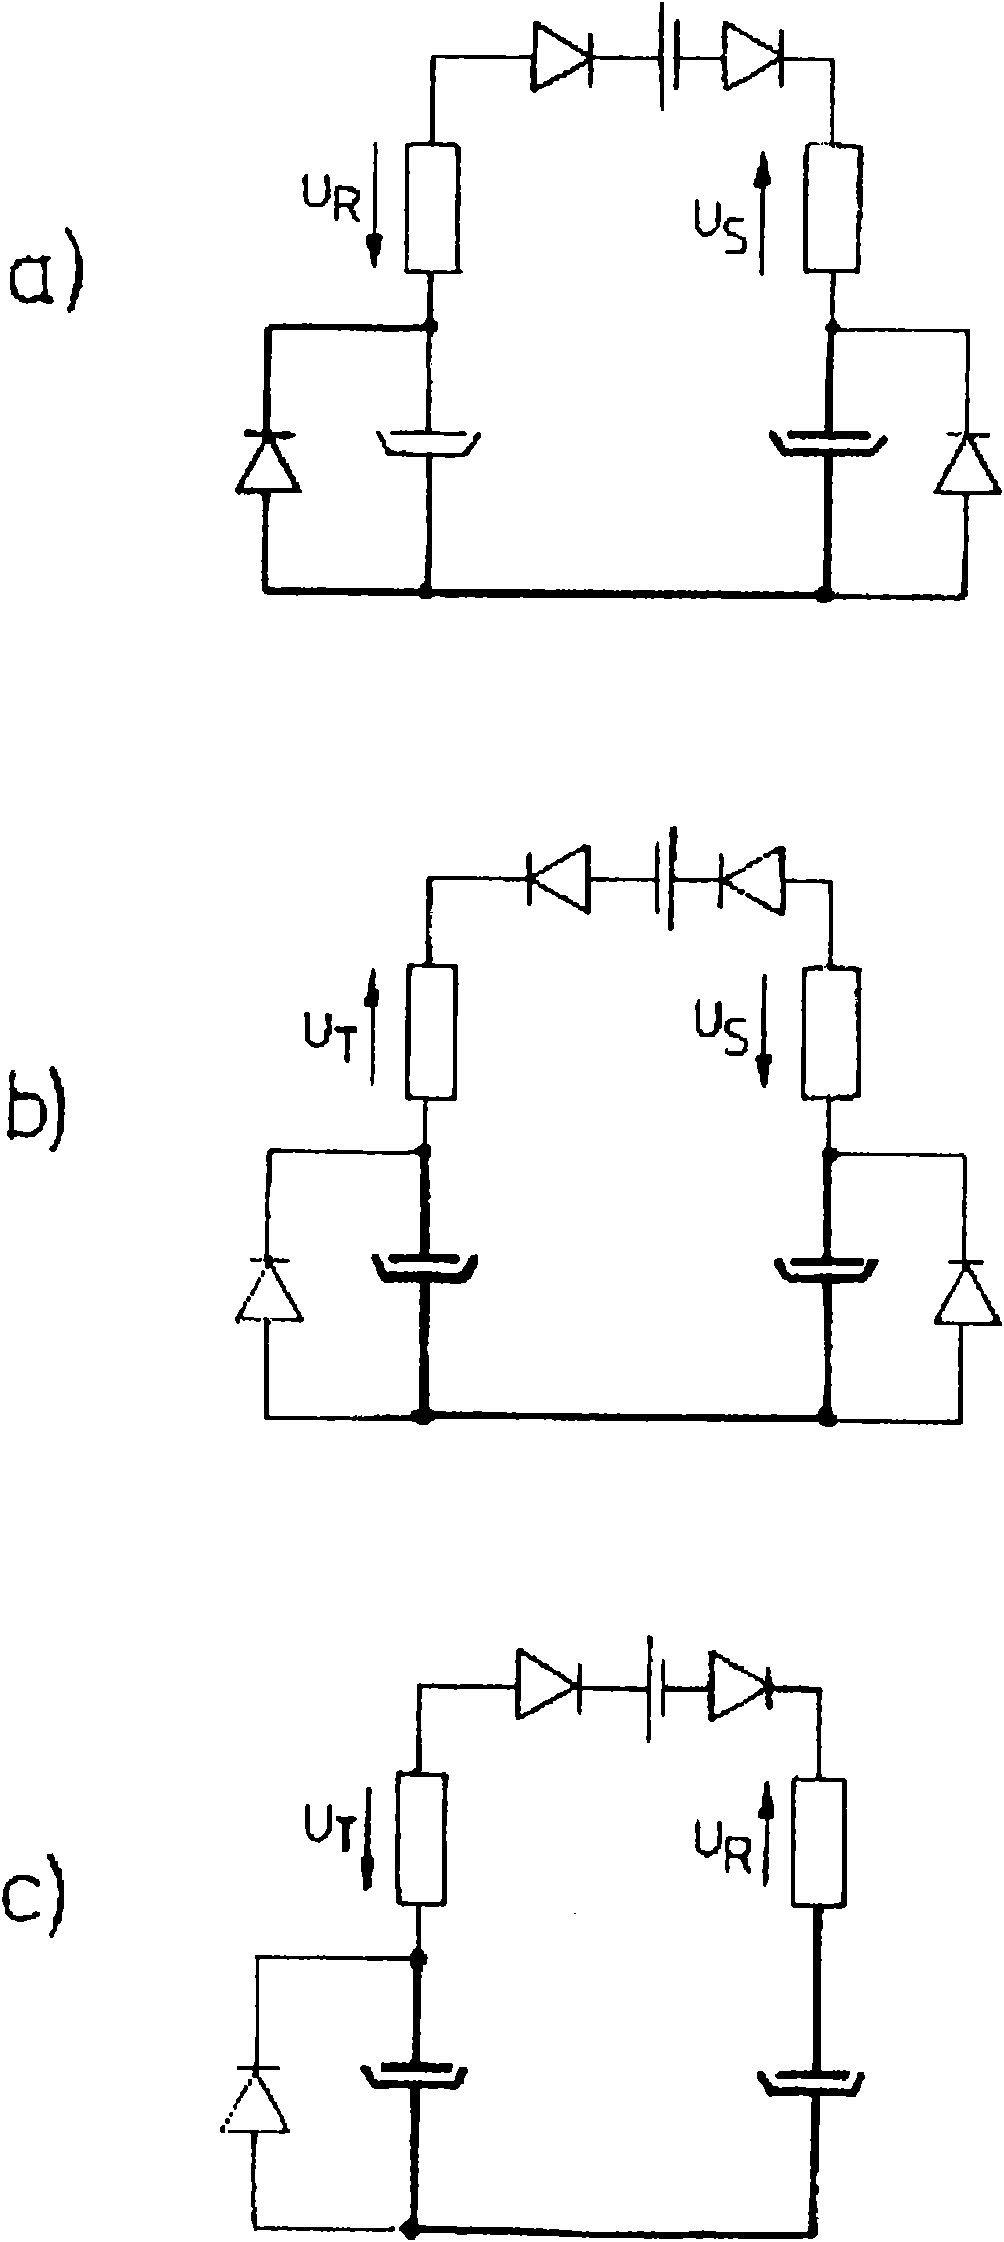 Battery charger circuit operated from a three-phase network